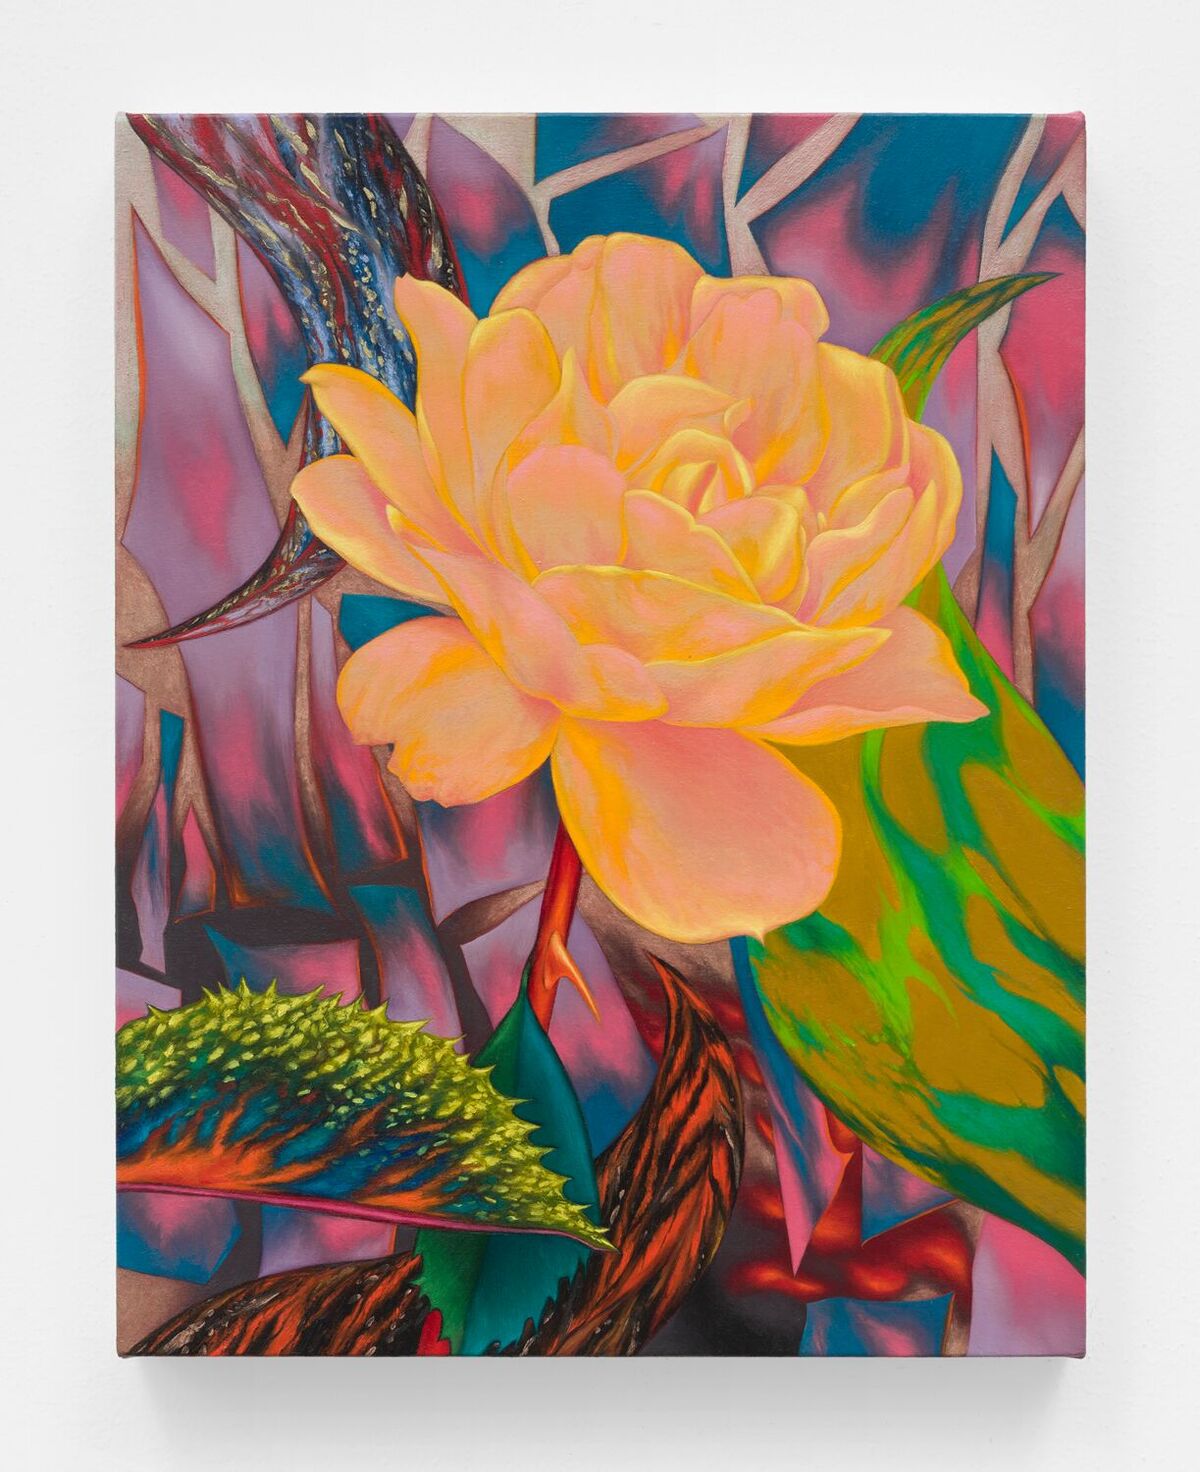 Tom Allen, Cythera 1, 2019. Courtesy of the X Museum, Beijing.